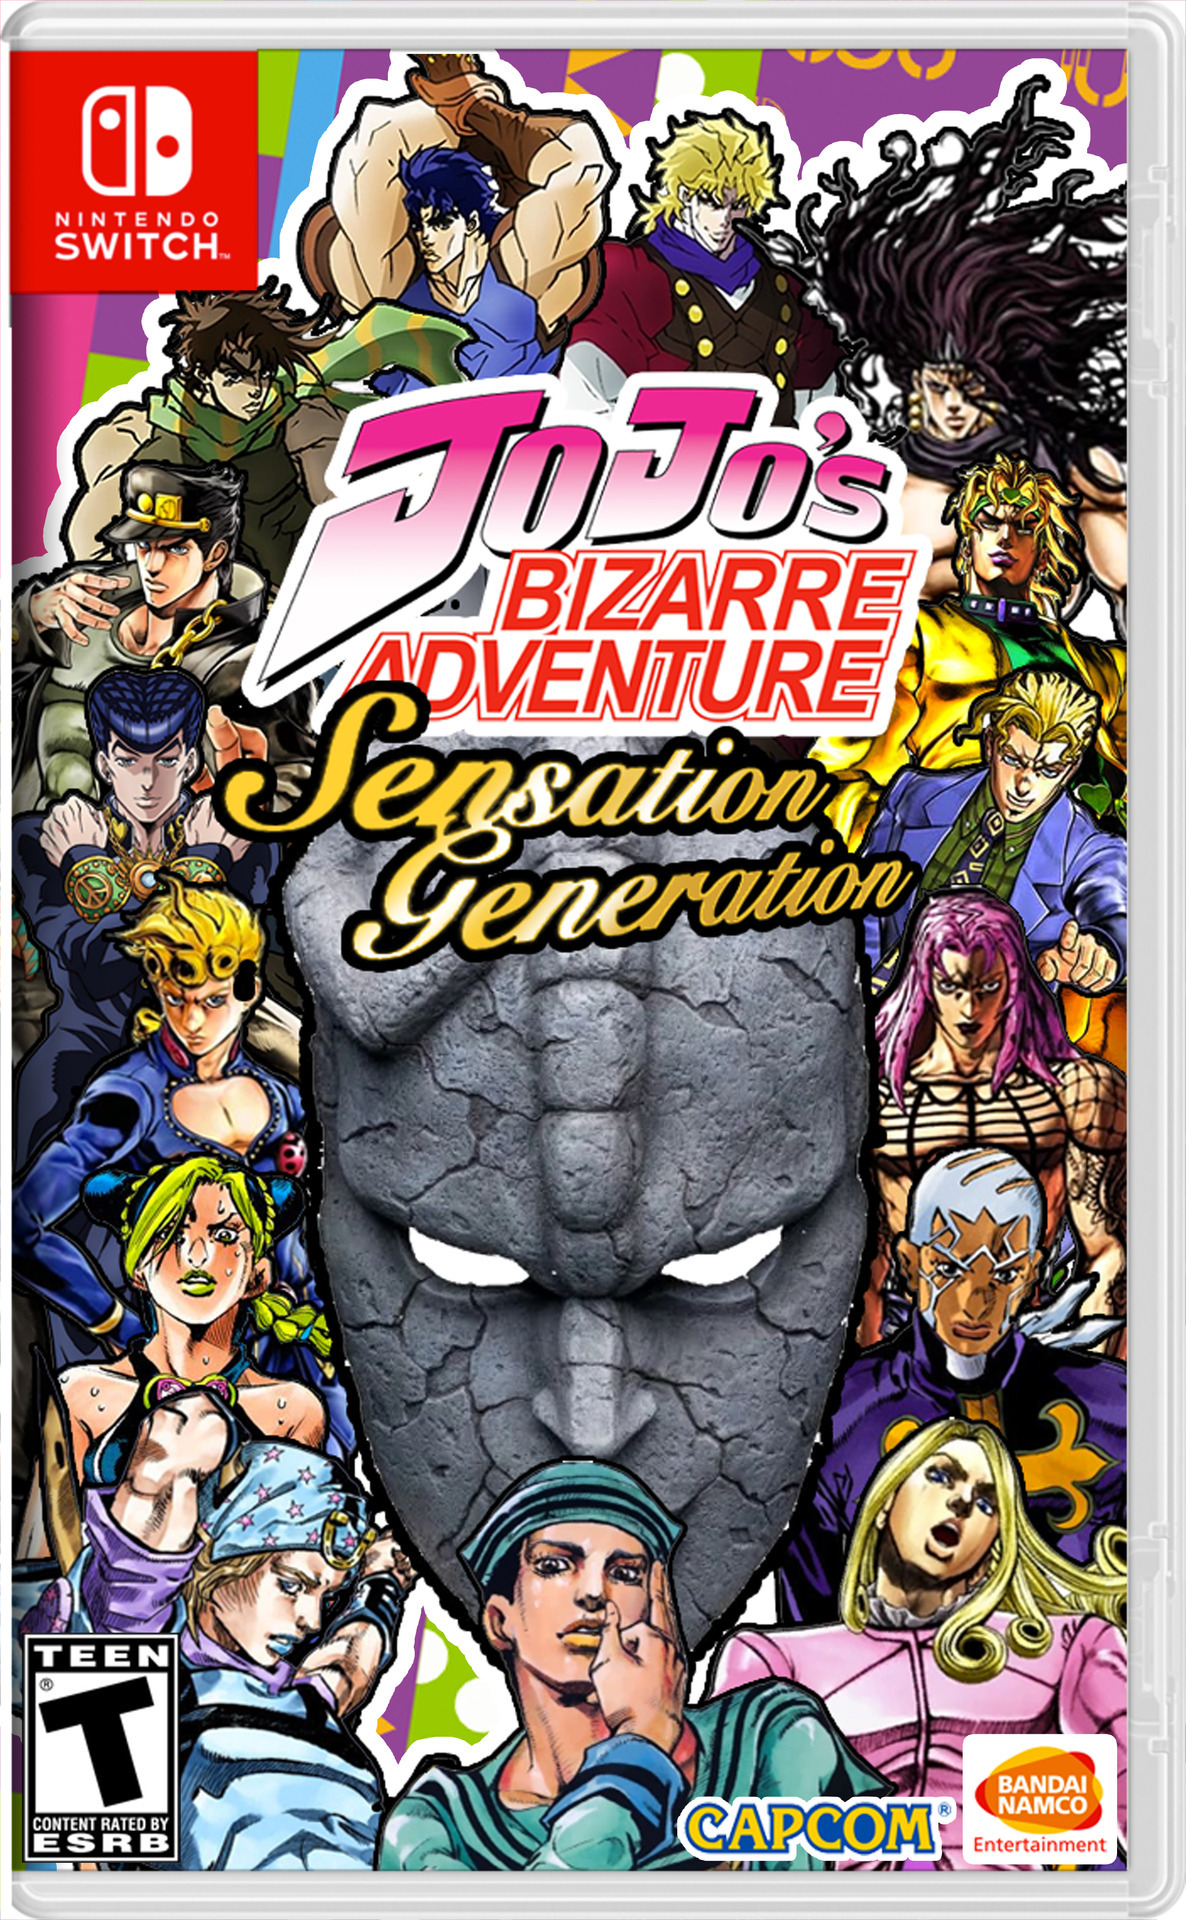 I’ve been on a huge Jojo kick recently, so I made a fake game cover for a Jojo